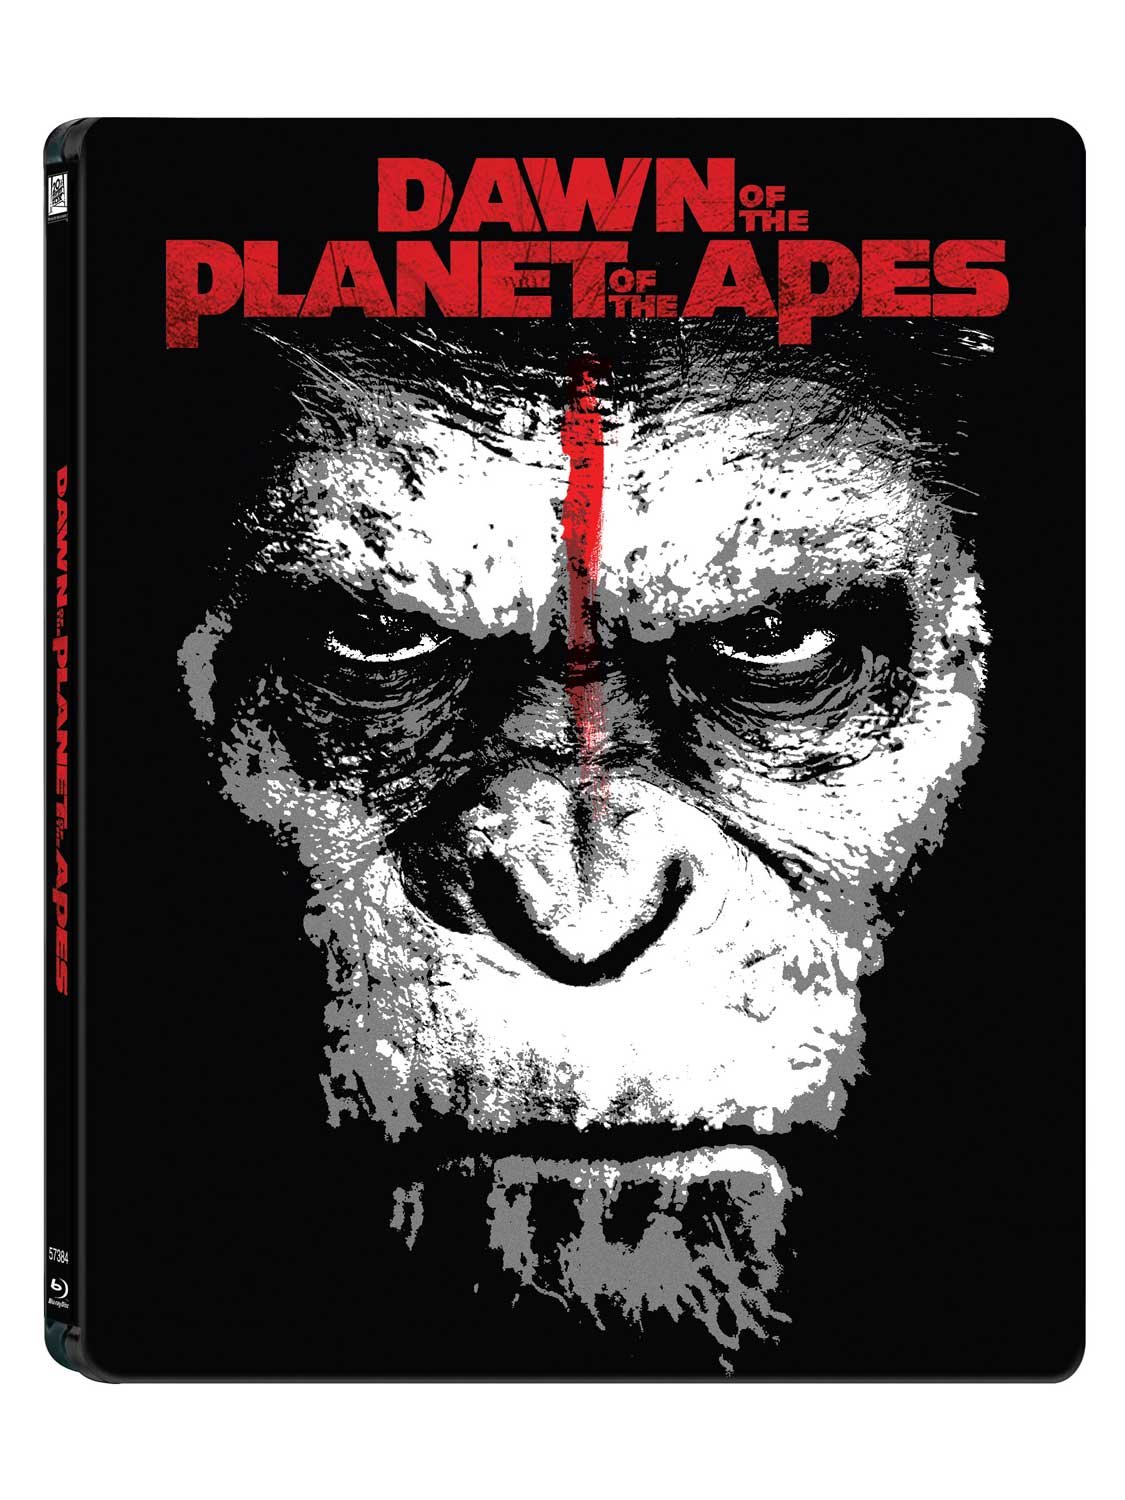 dawn-of-the-planet-of-the-apes-steelbook-blu-ray-3d-dvd-2-disc